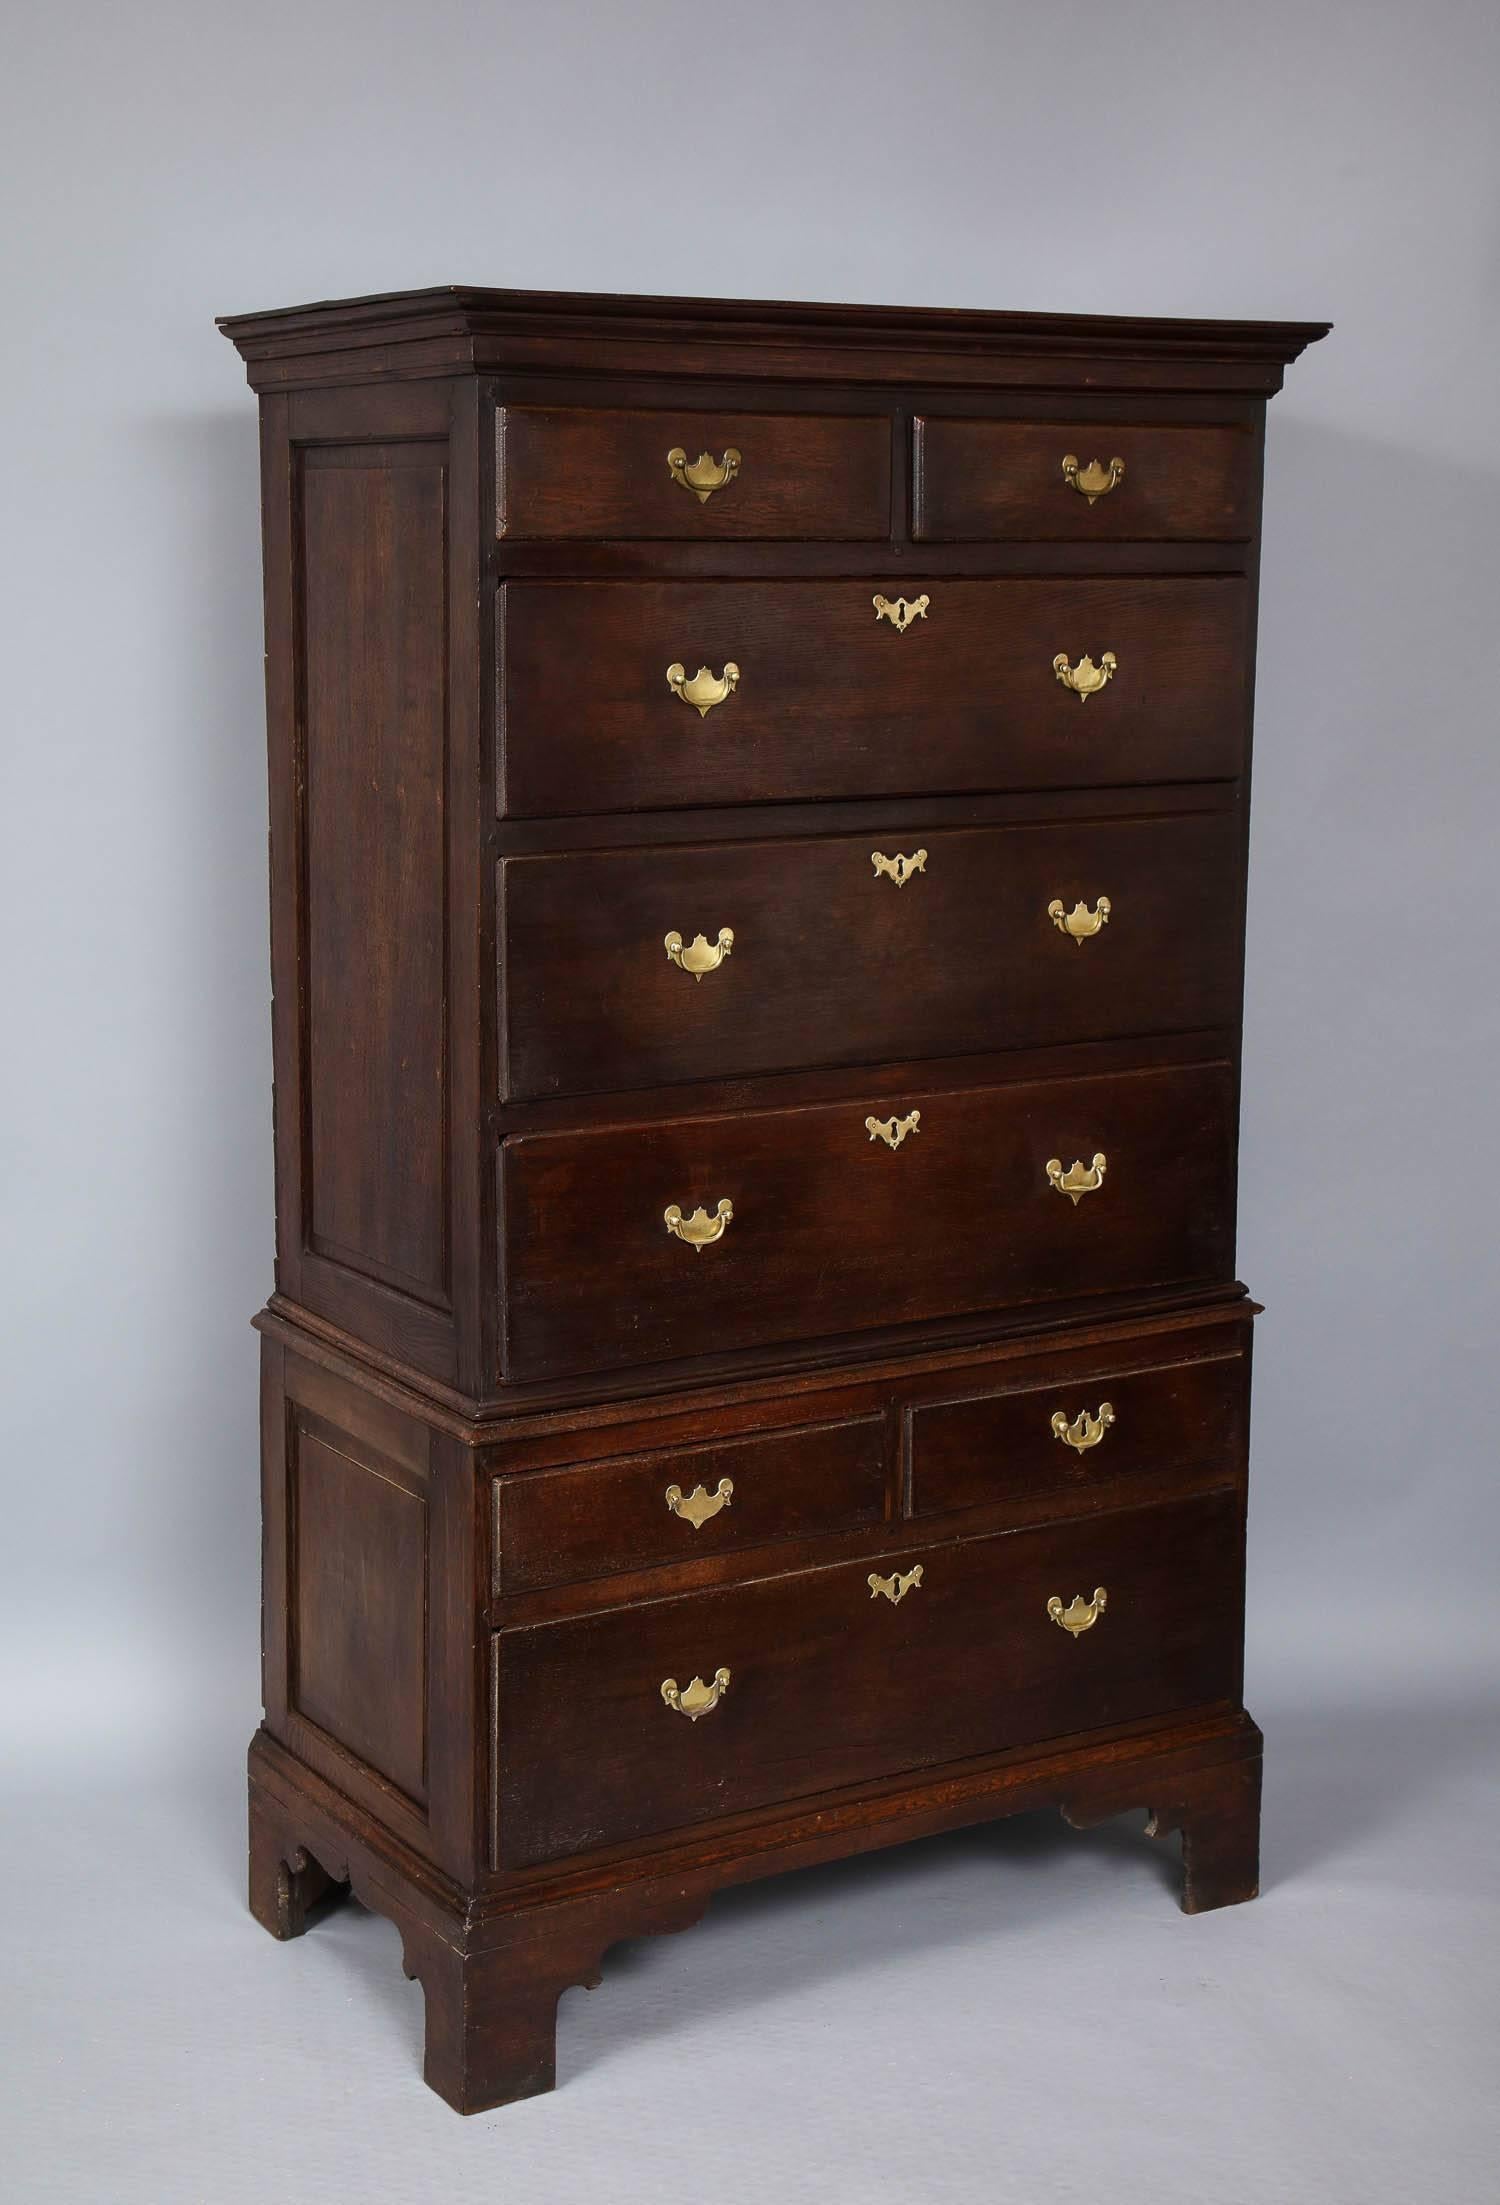 Fine 18th century Welsh oak chest on chest of diminutive scale, the top with flat and finished surface over two small and three large drawers, the lower section comprising two small and one deep drawer, the sides of both sections having paneled